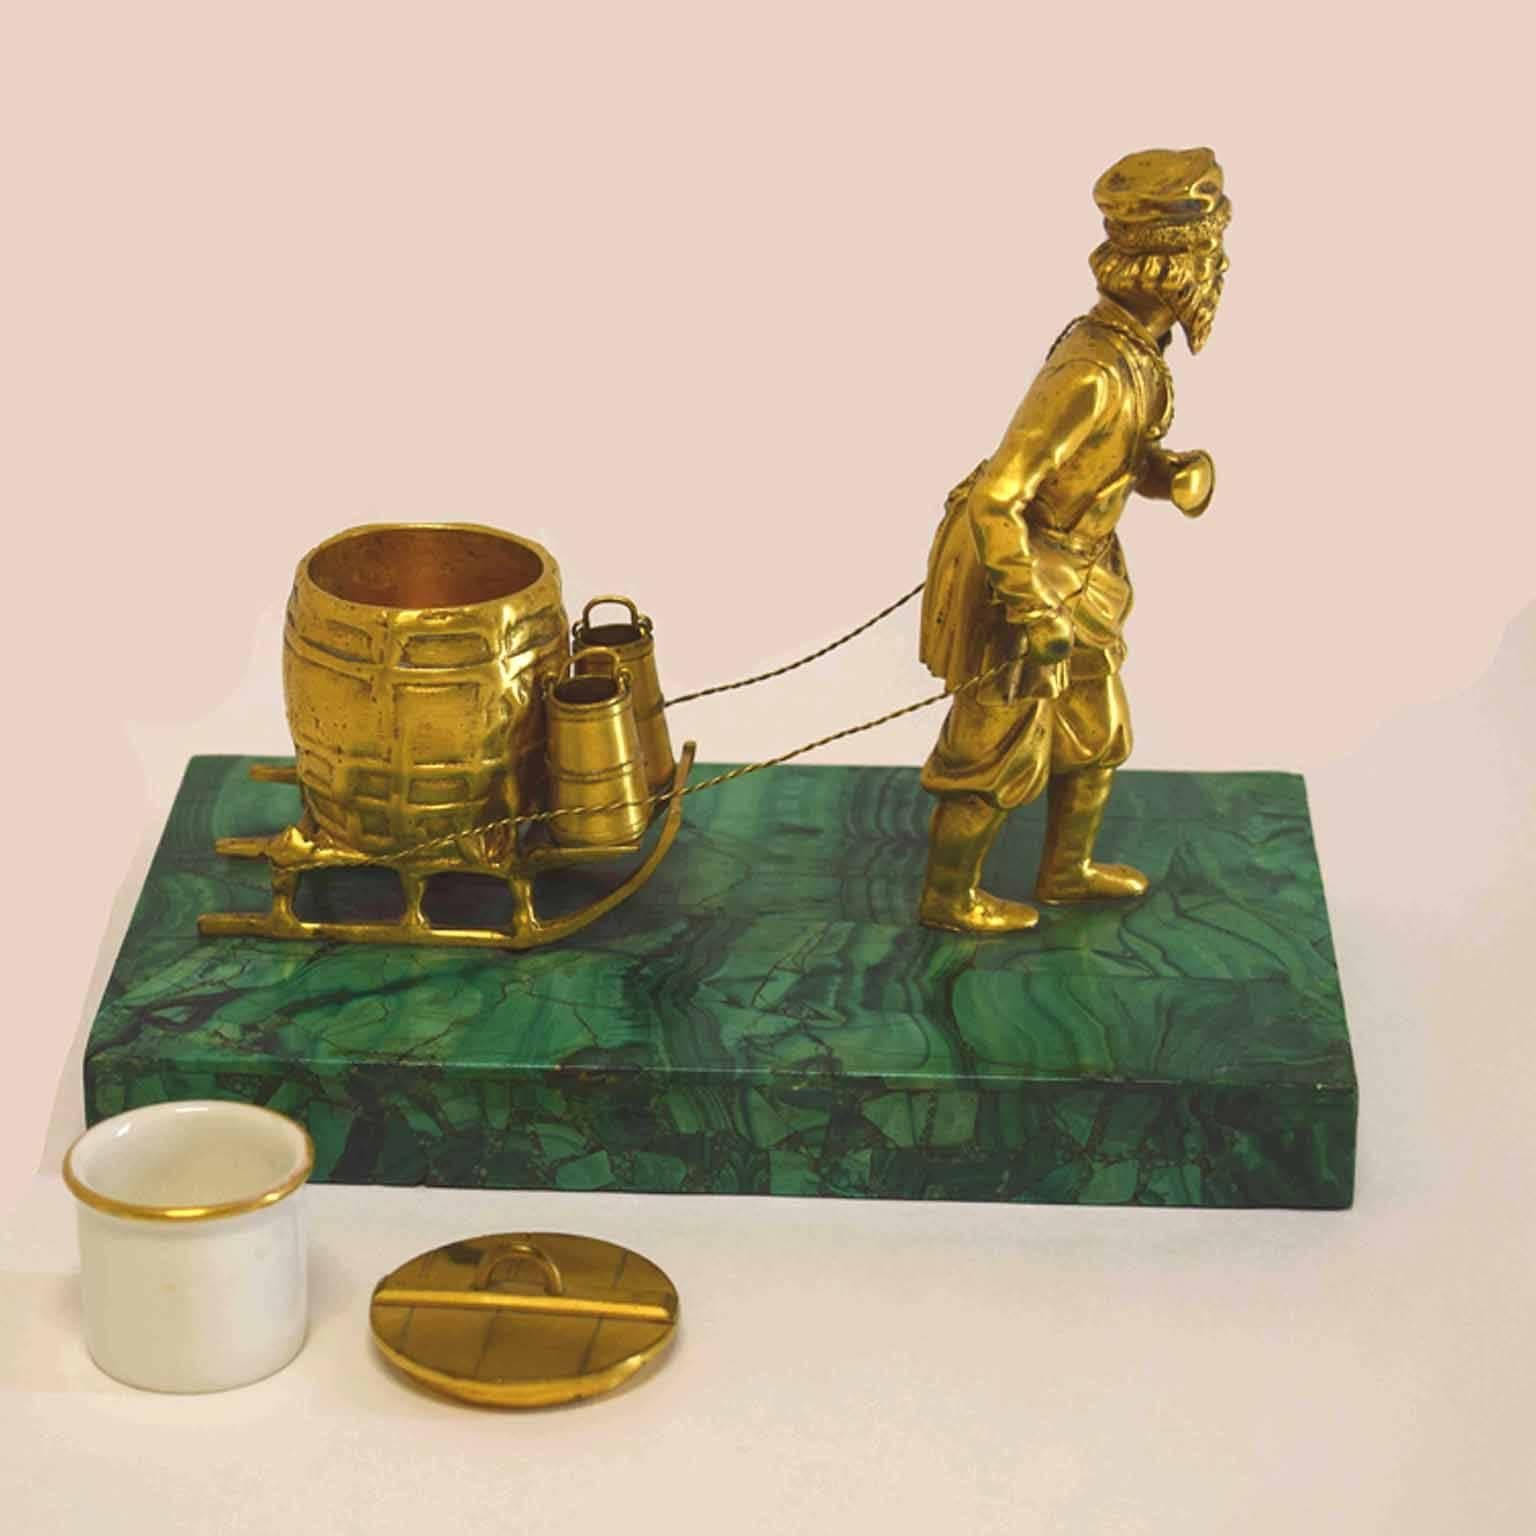 Inkwell of a peasant, sled and milk barrel with pails, {quill holders} the inkwell within the milk barrel, raised upon a malachite veneered plinth, {lacking rope}.